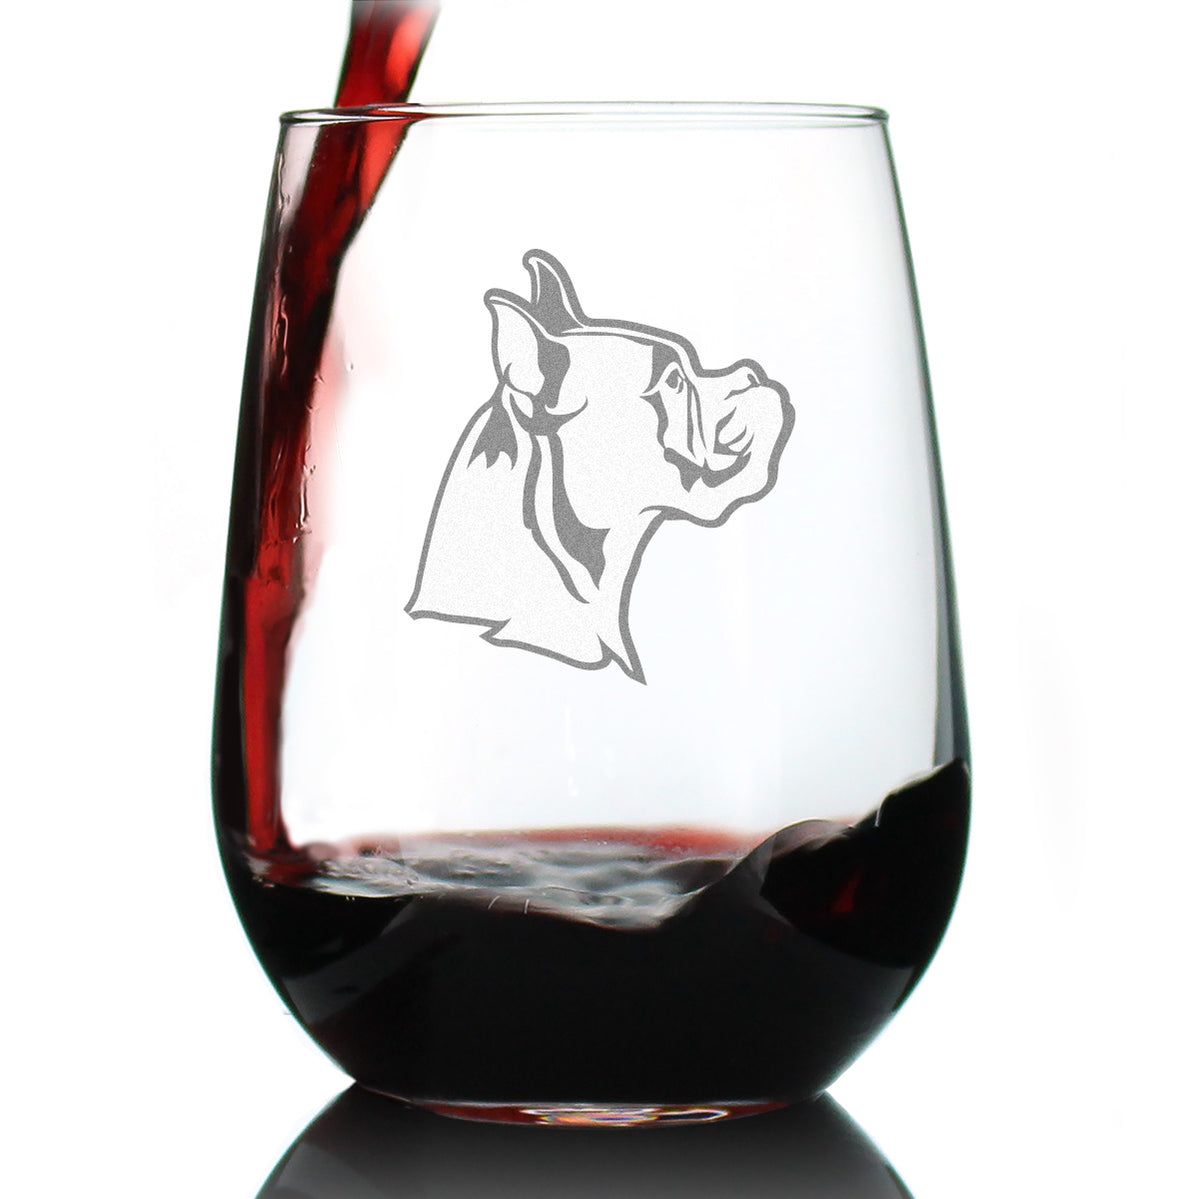 Boxer with Pointed Ears - Stemless Wine Glass - Cute Boxer Themed Dog Gifts and Party Decor for Women and Men - Large Glasses